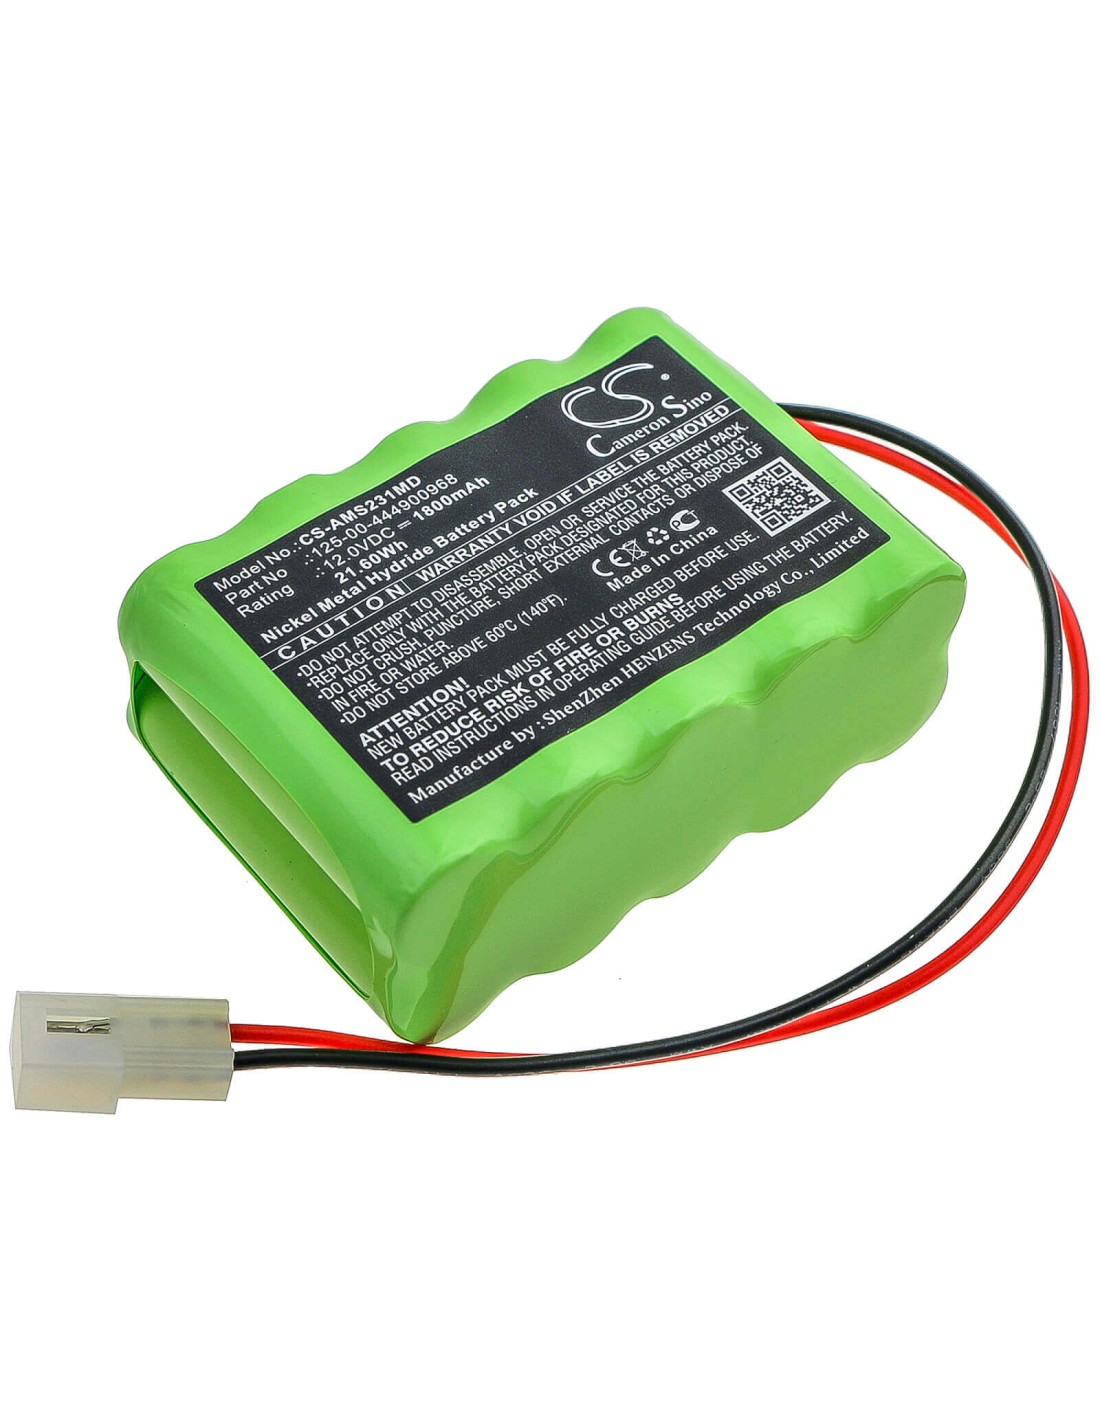 Battery for Alaris Medicalsystems, Infusion Pump 231, Infusion Pump 531 12V, 1800mAh - 21.60Wh